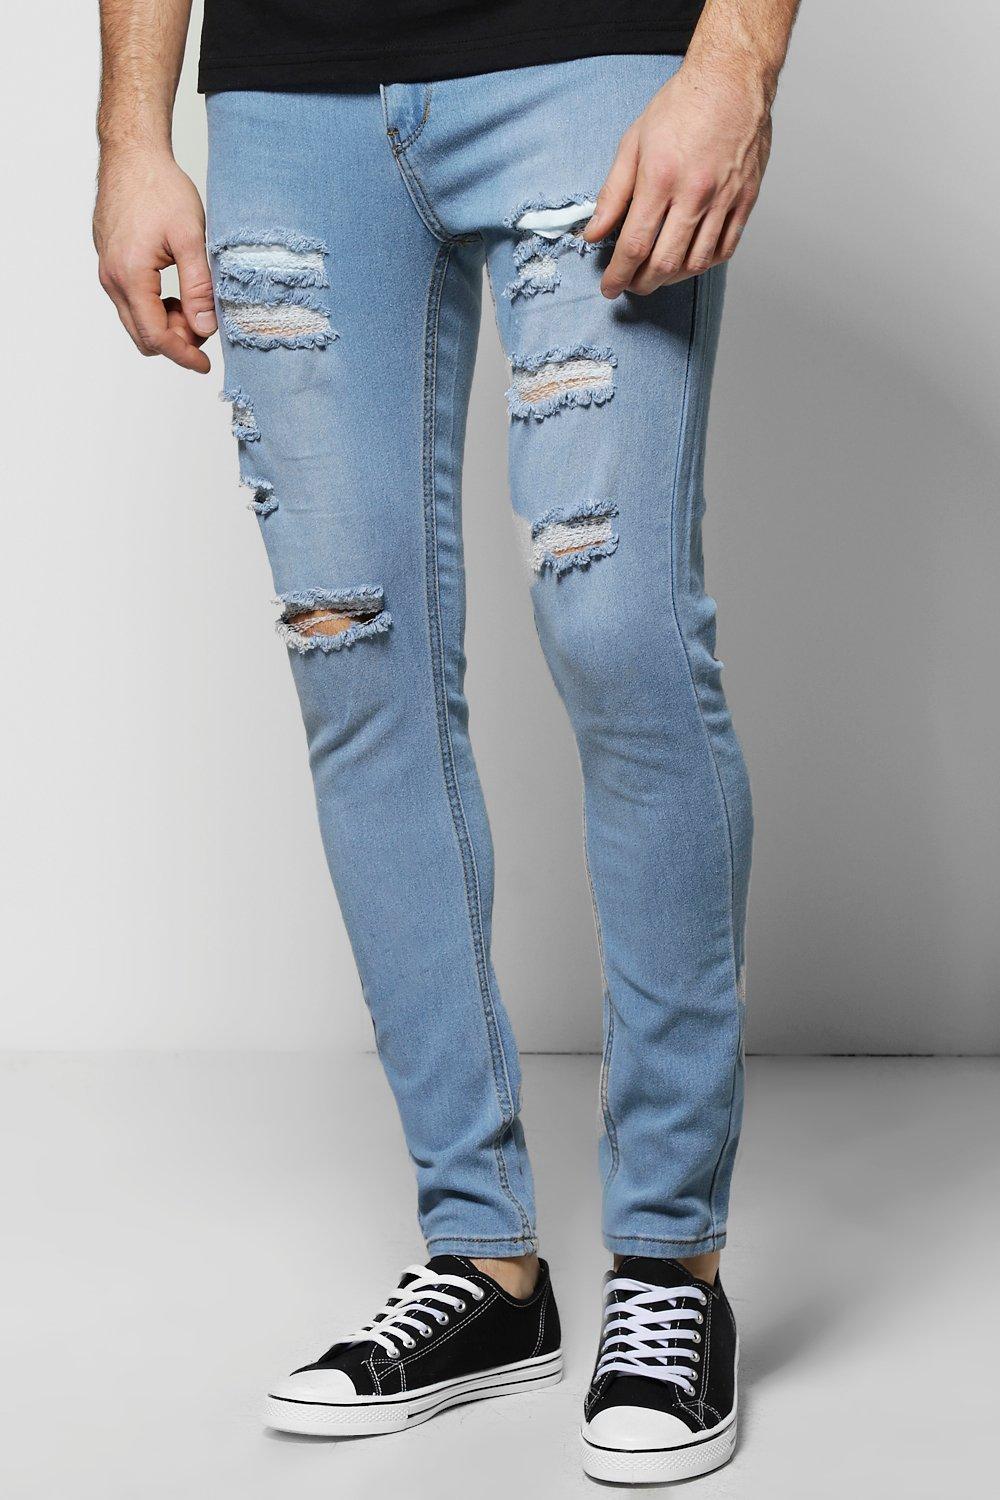 pale ripped jeans